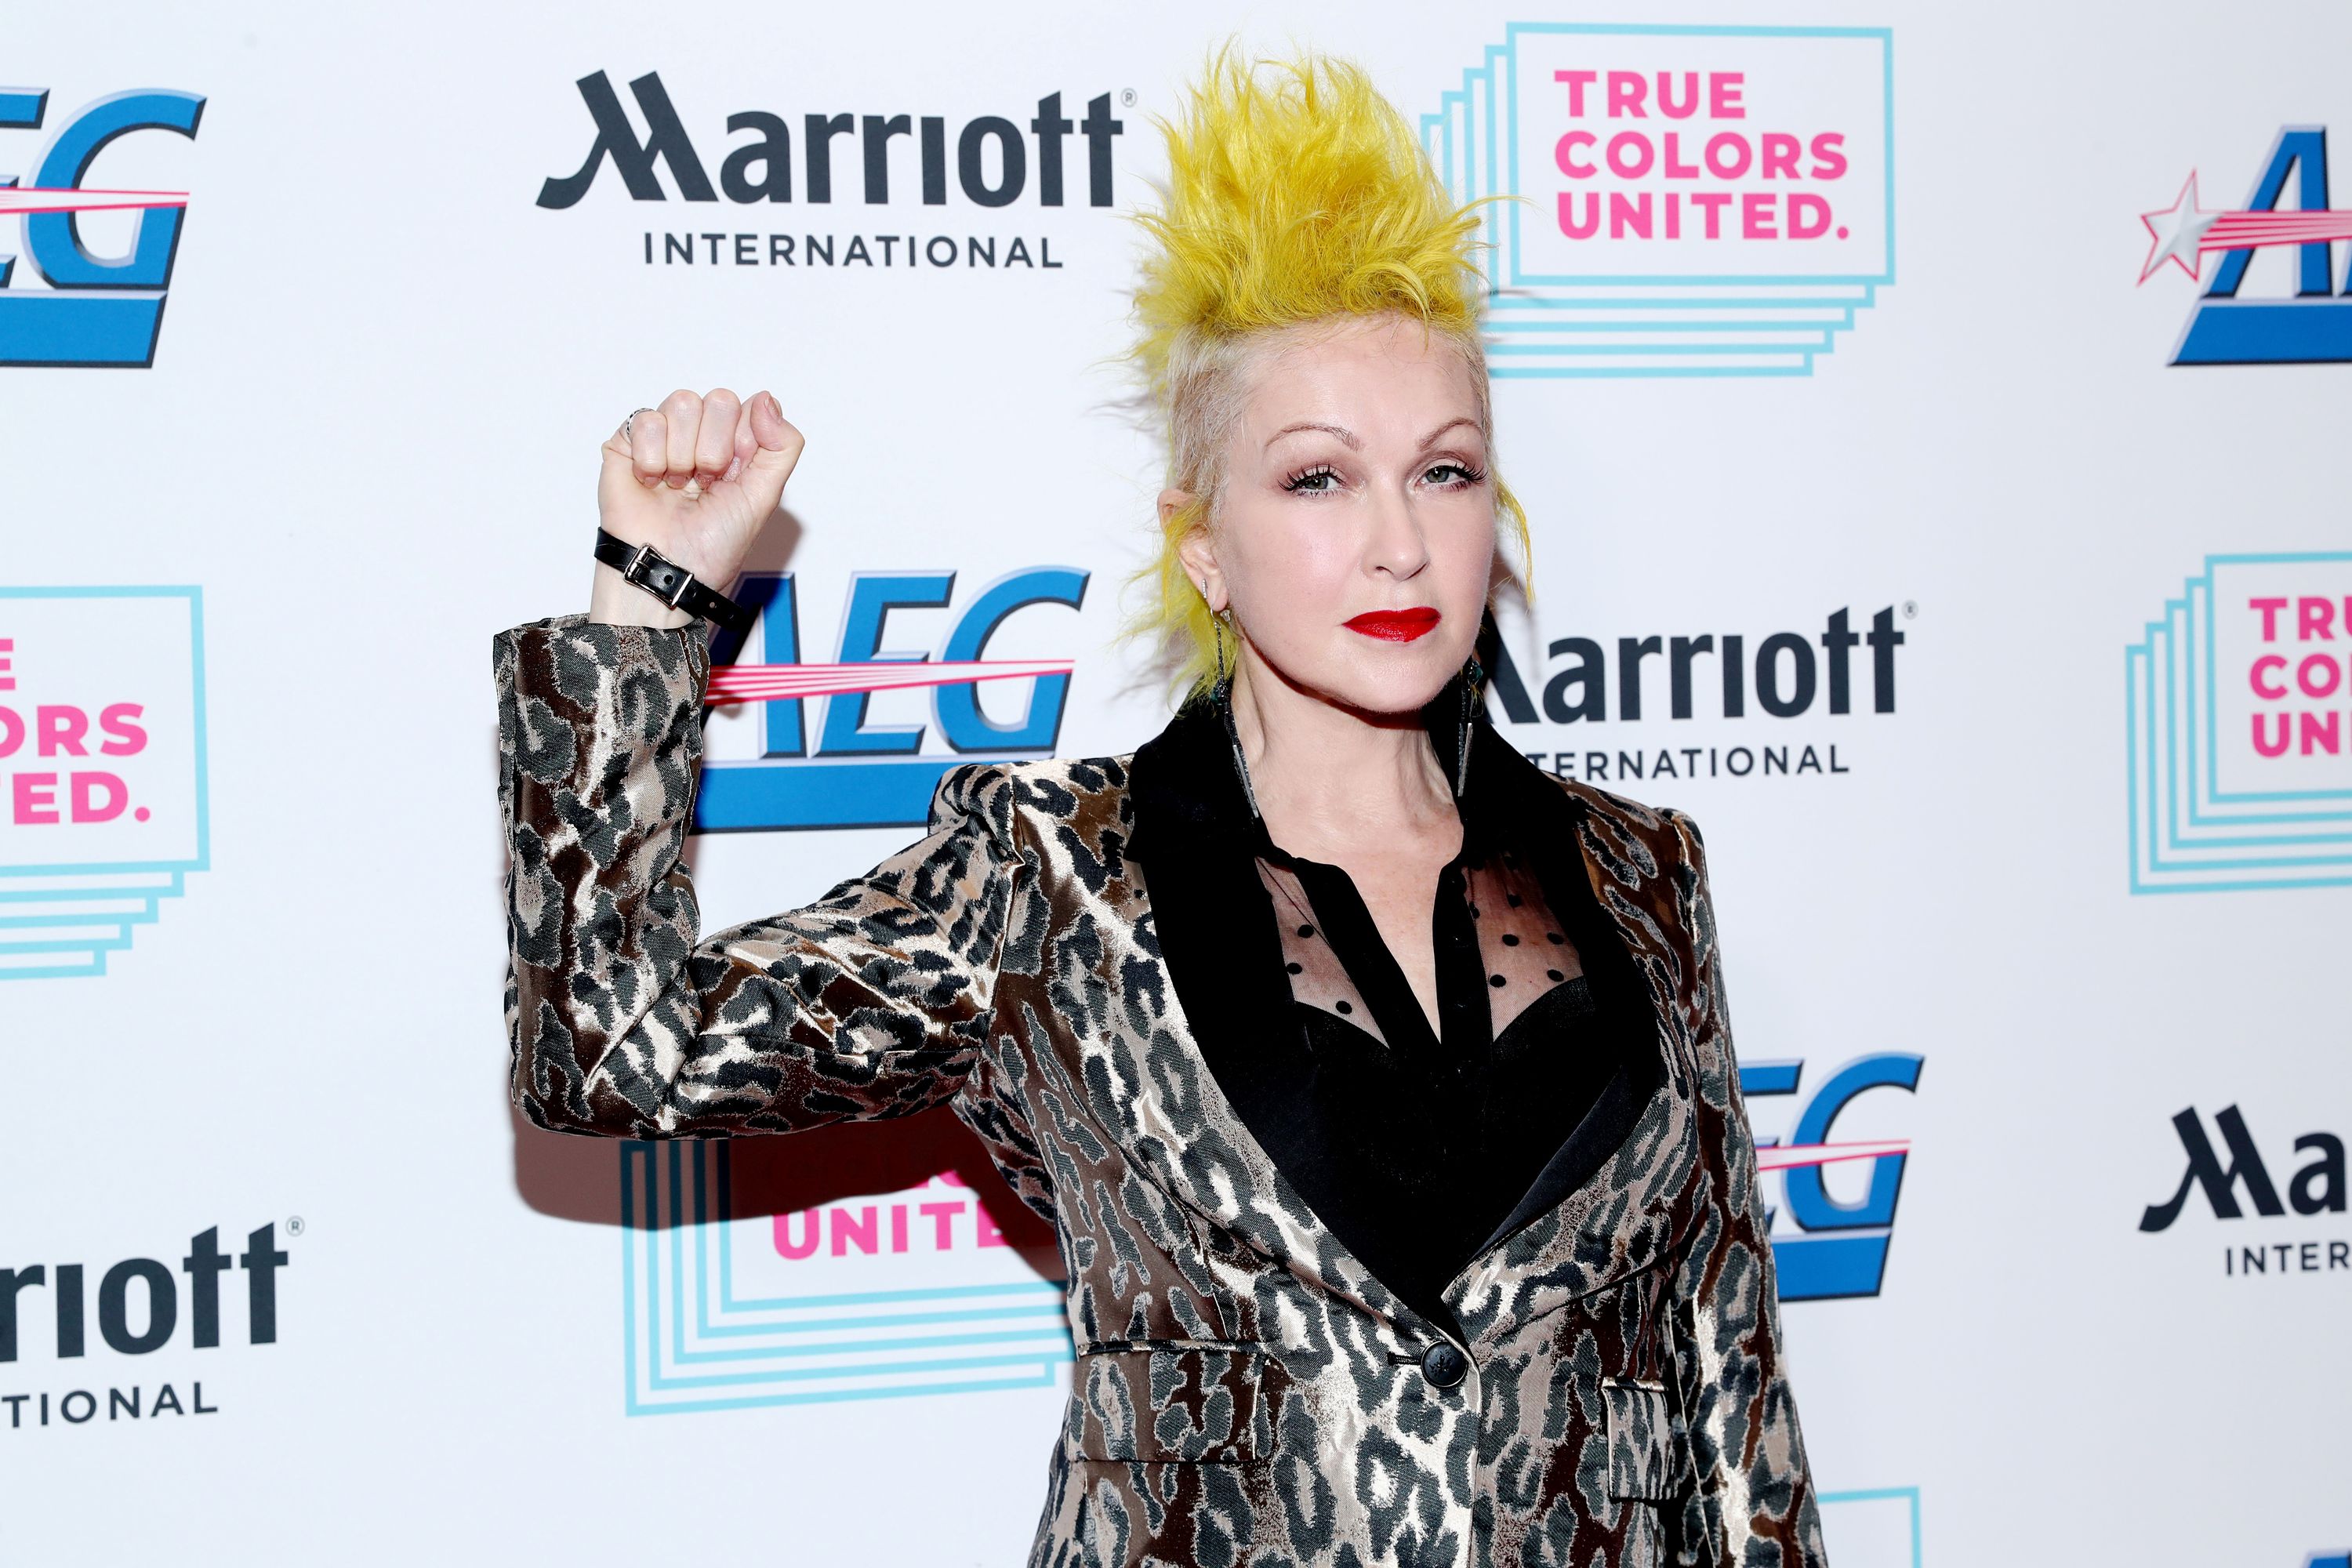 Cyndi Lauper's Blue Hair: A Statement of Individuality - wide 8